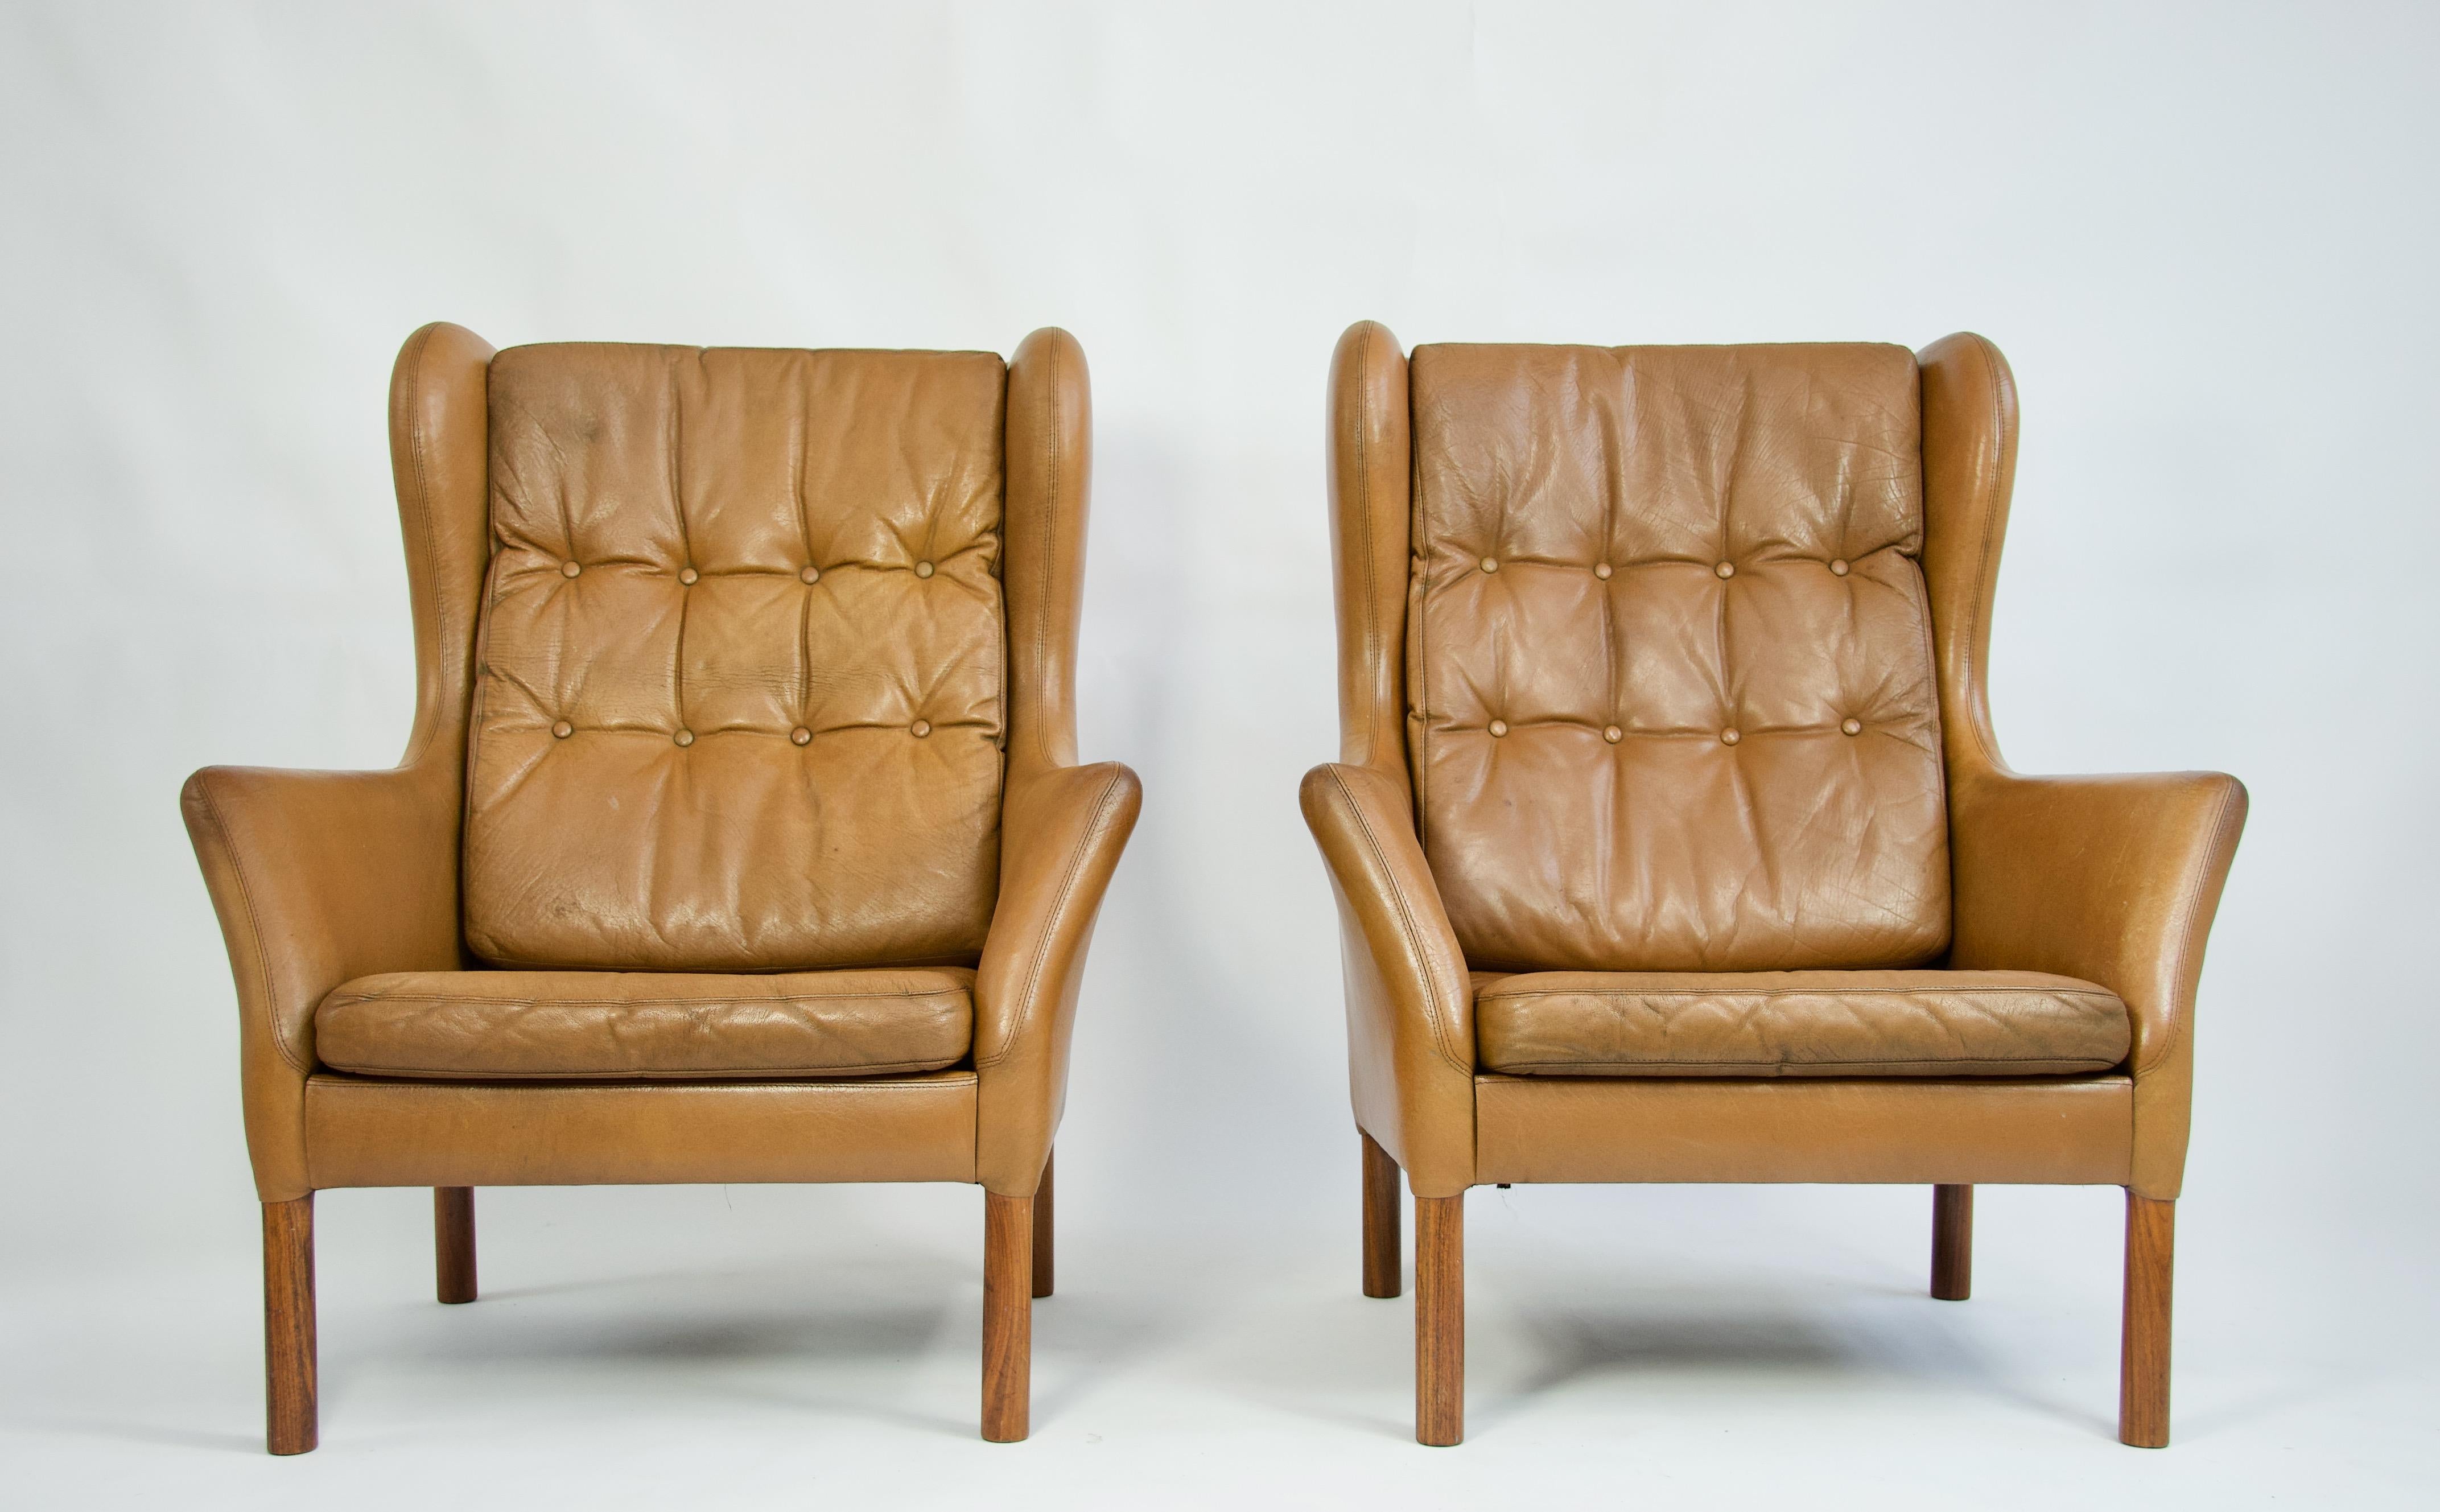 Pair of Danish high back lounge chairs with original leather. Tufted cushions. Rosewood legs.